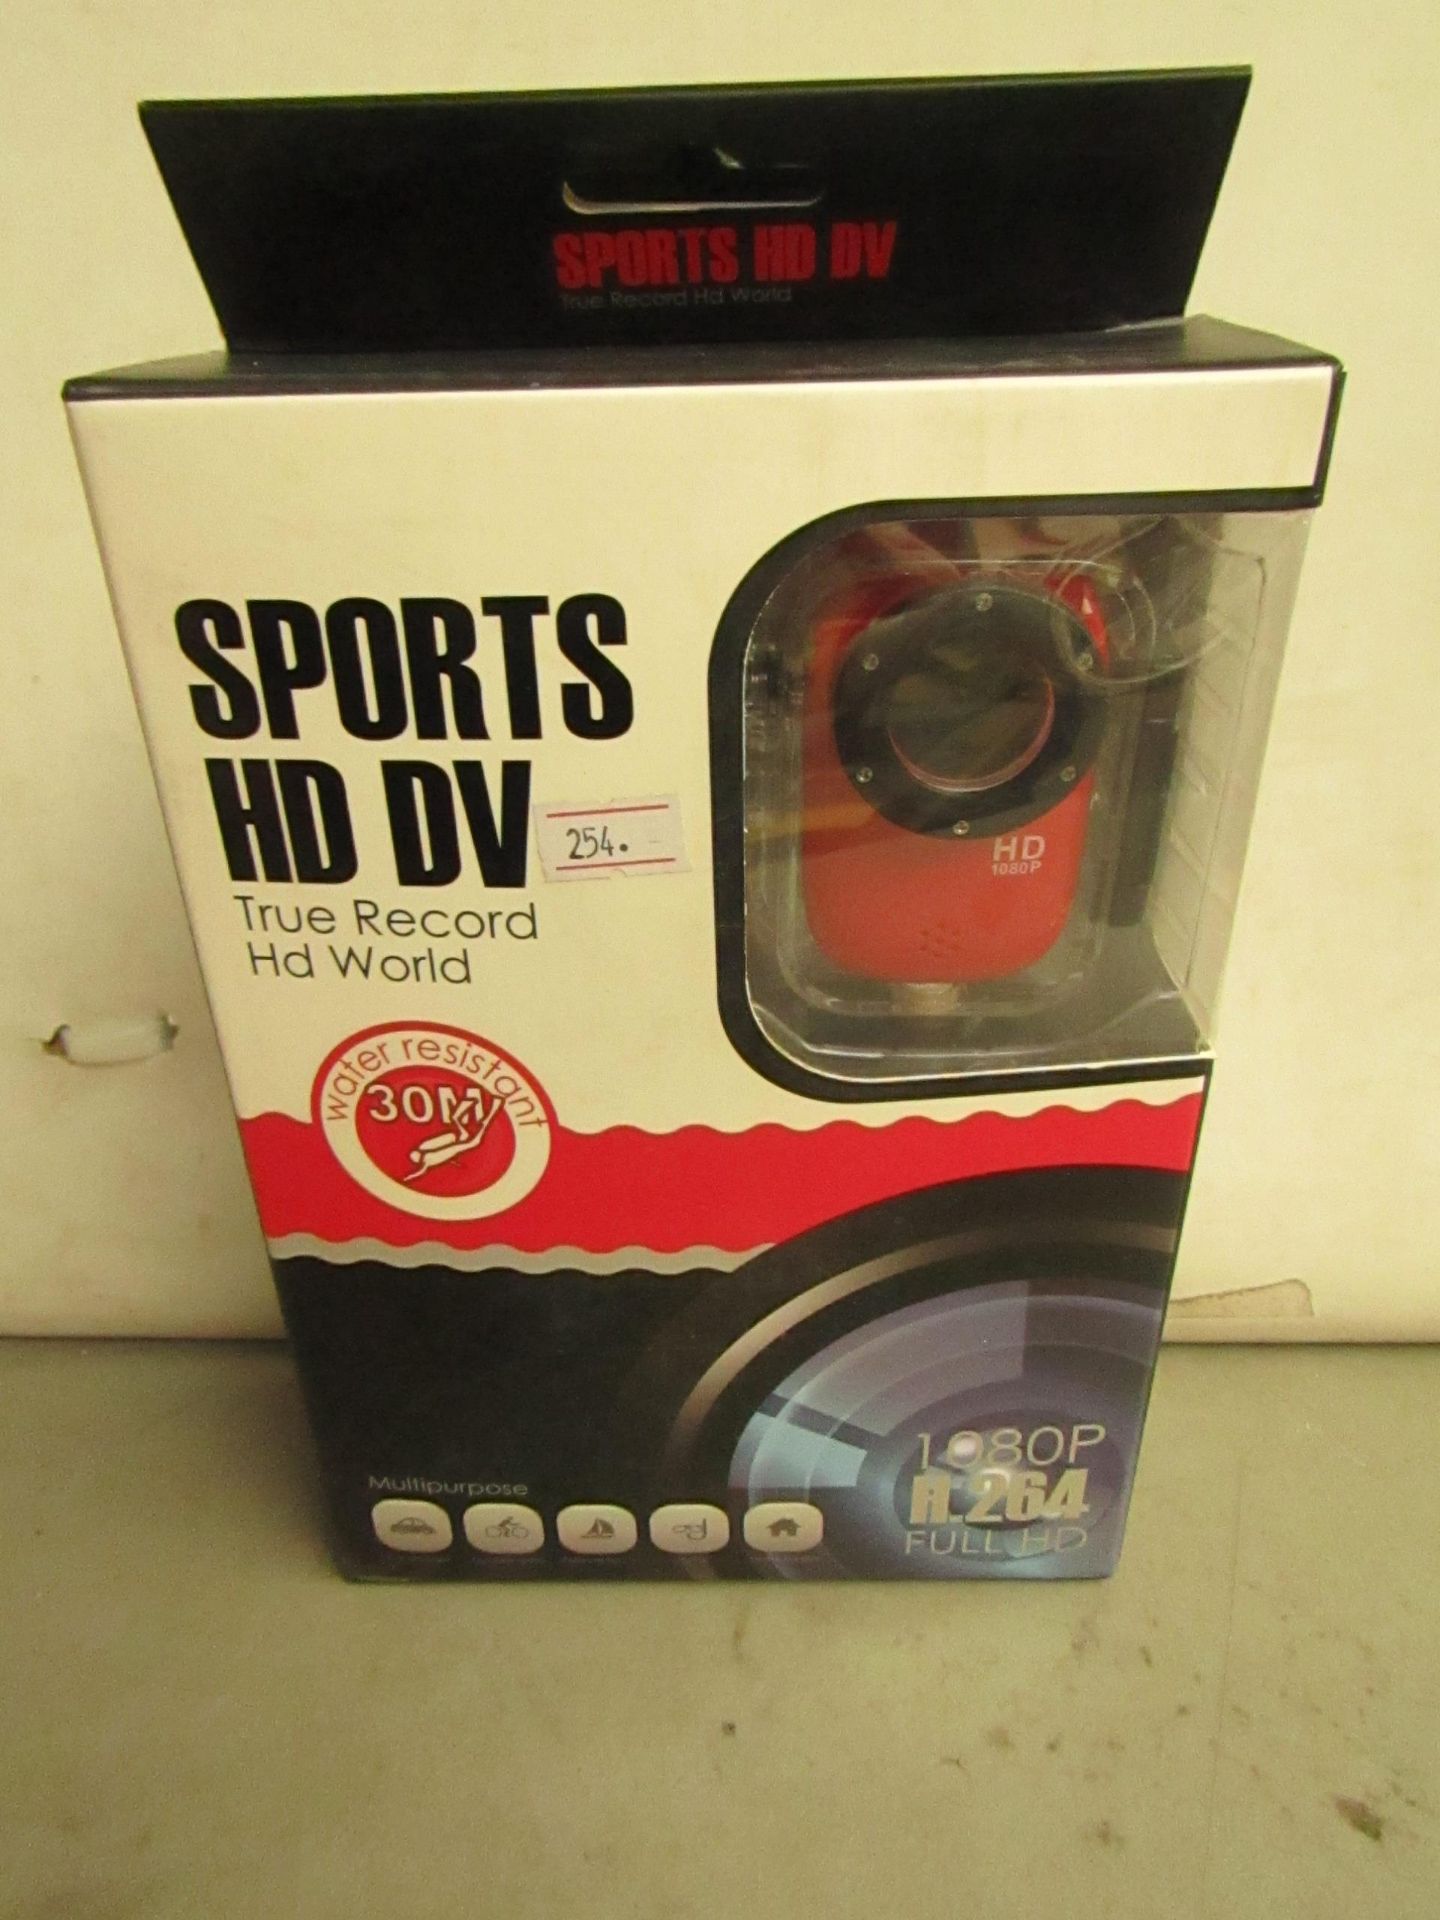 Sports HD DV Water Resistant 1080P Camera. Unused & Boxed.